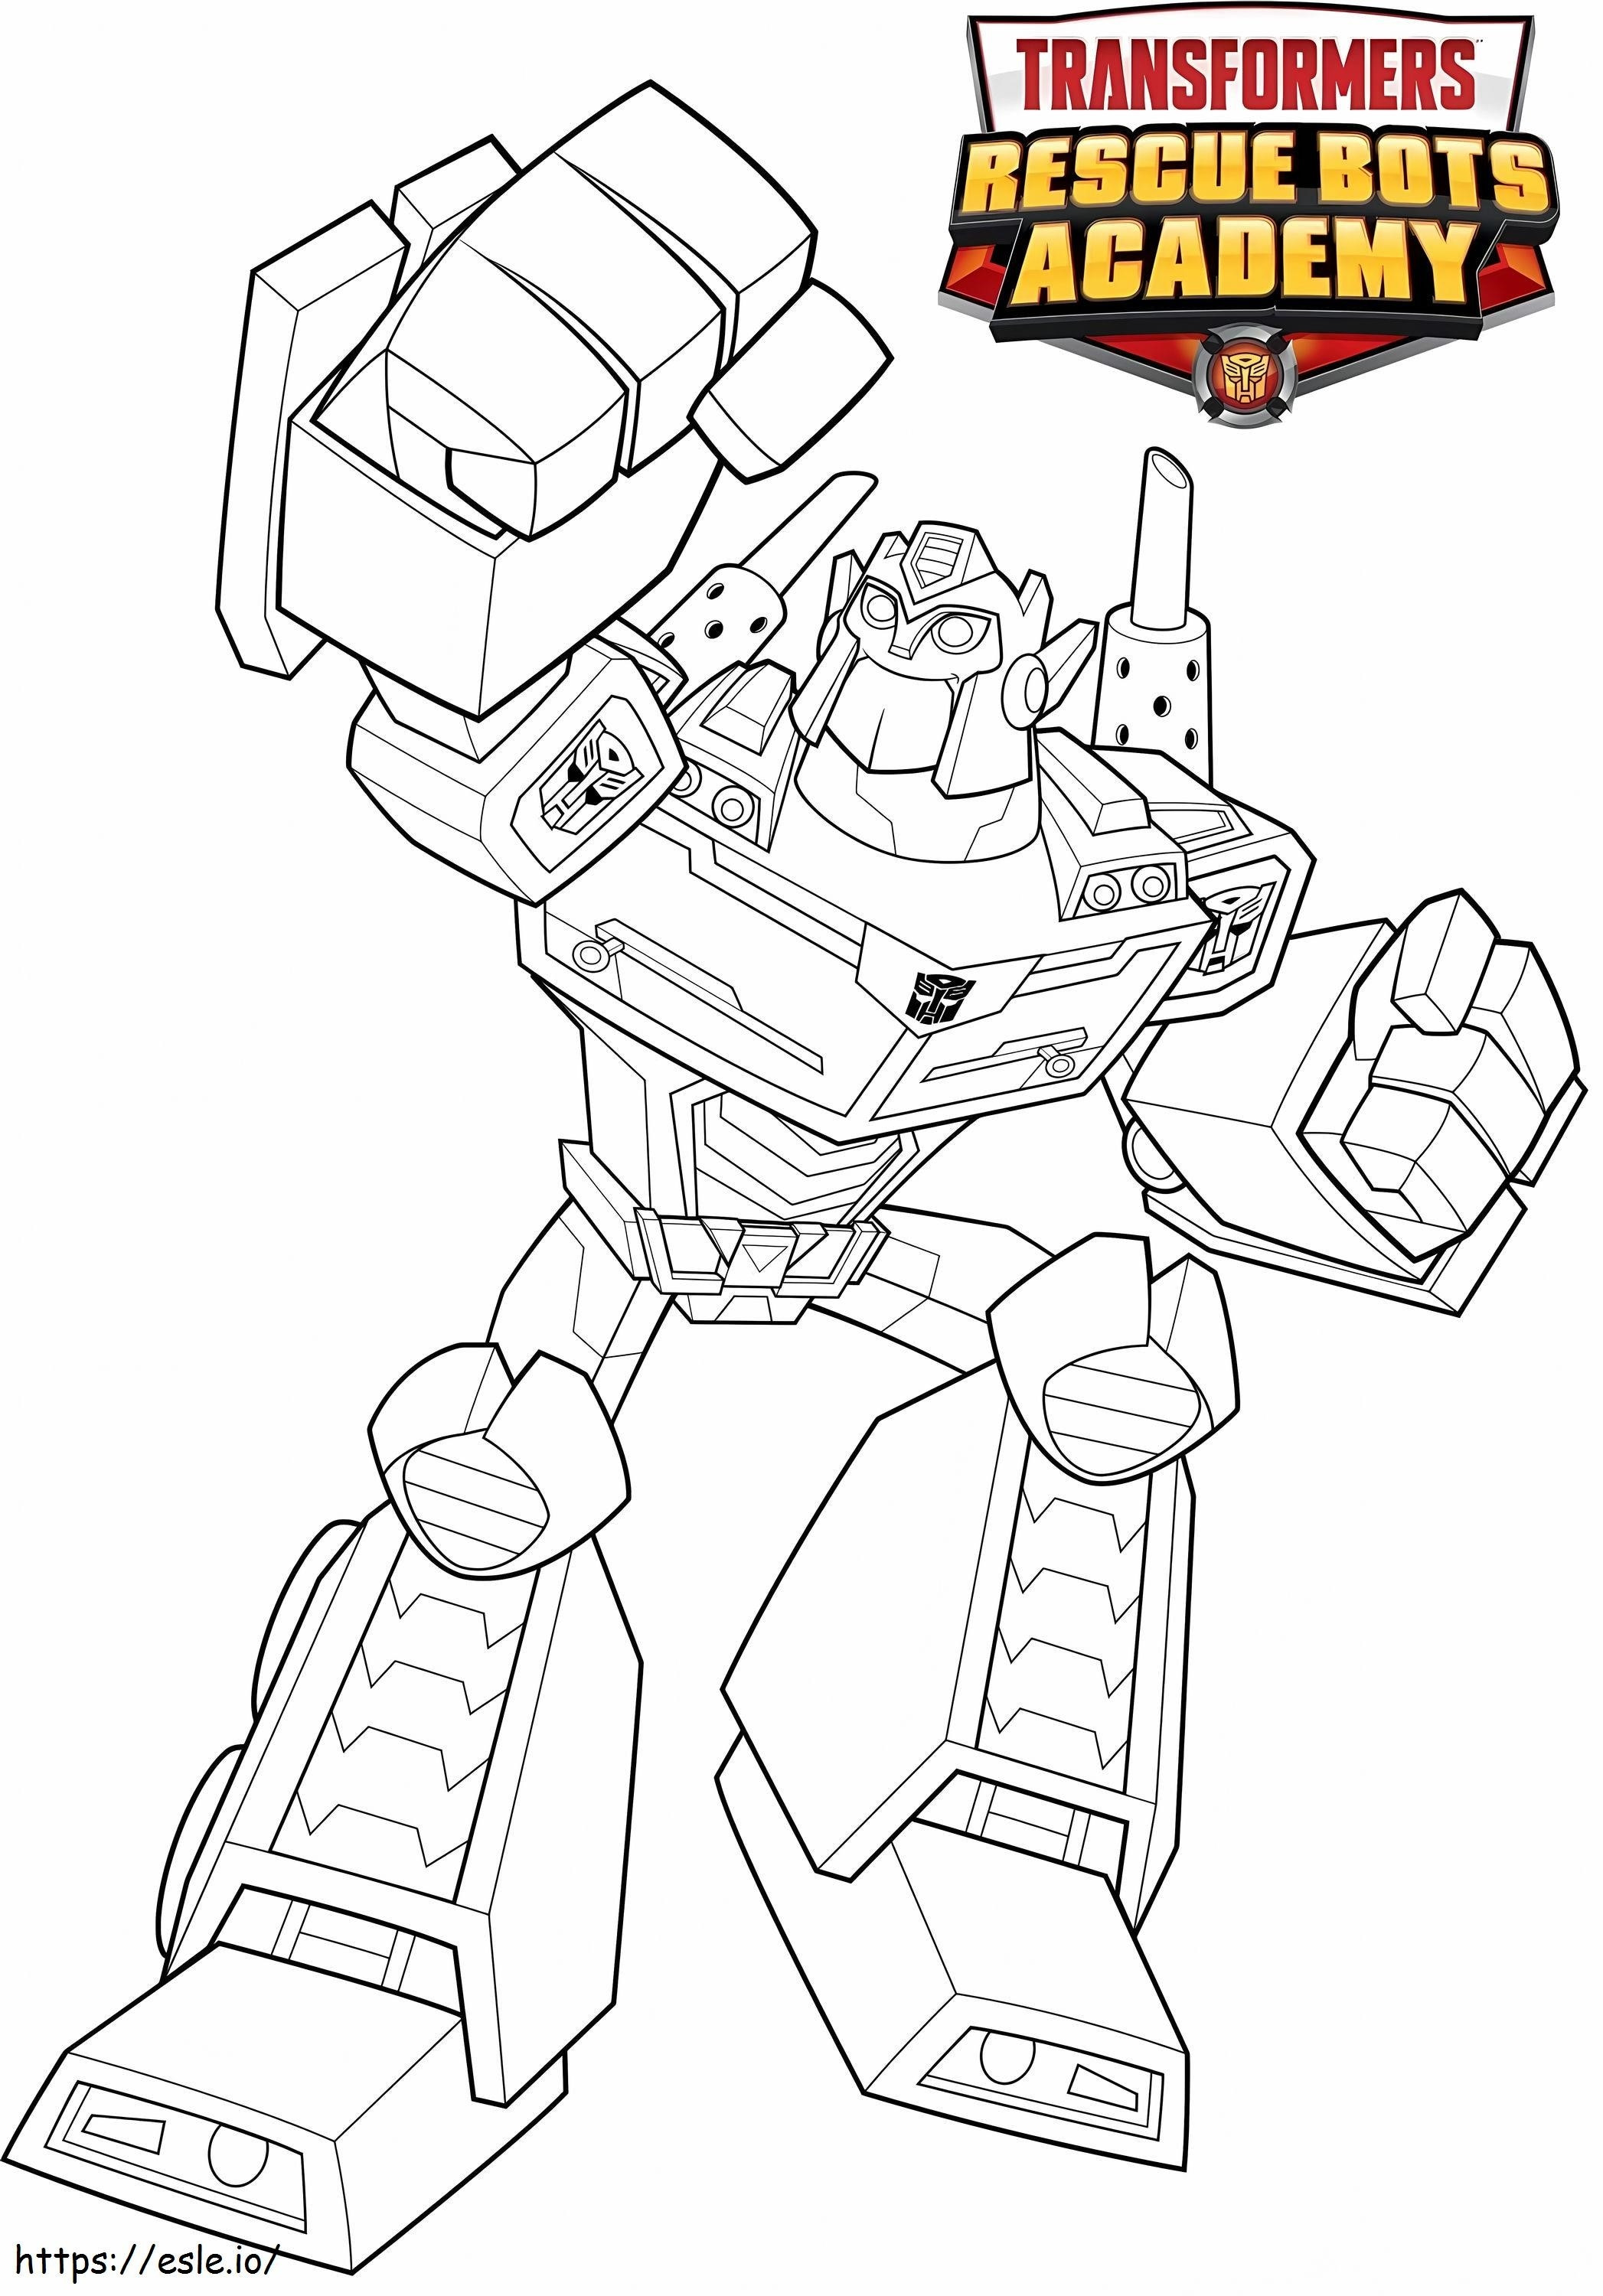 Transformers Pdf Images Of Rescue Robot Sabadaphnecottage Pdf coloring page